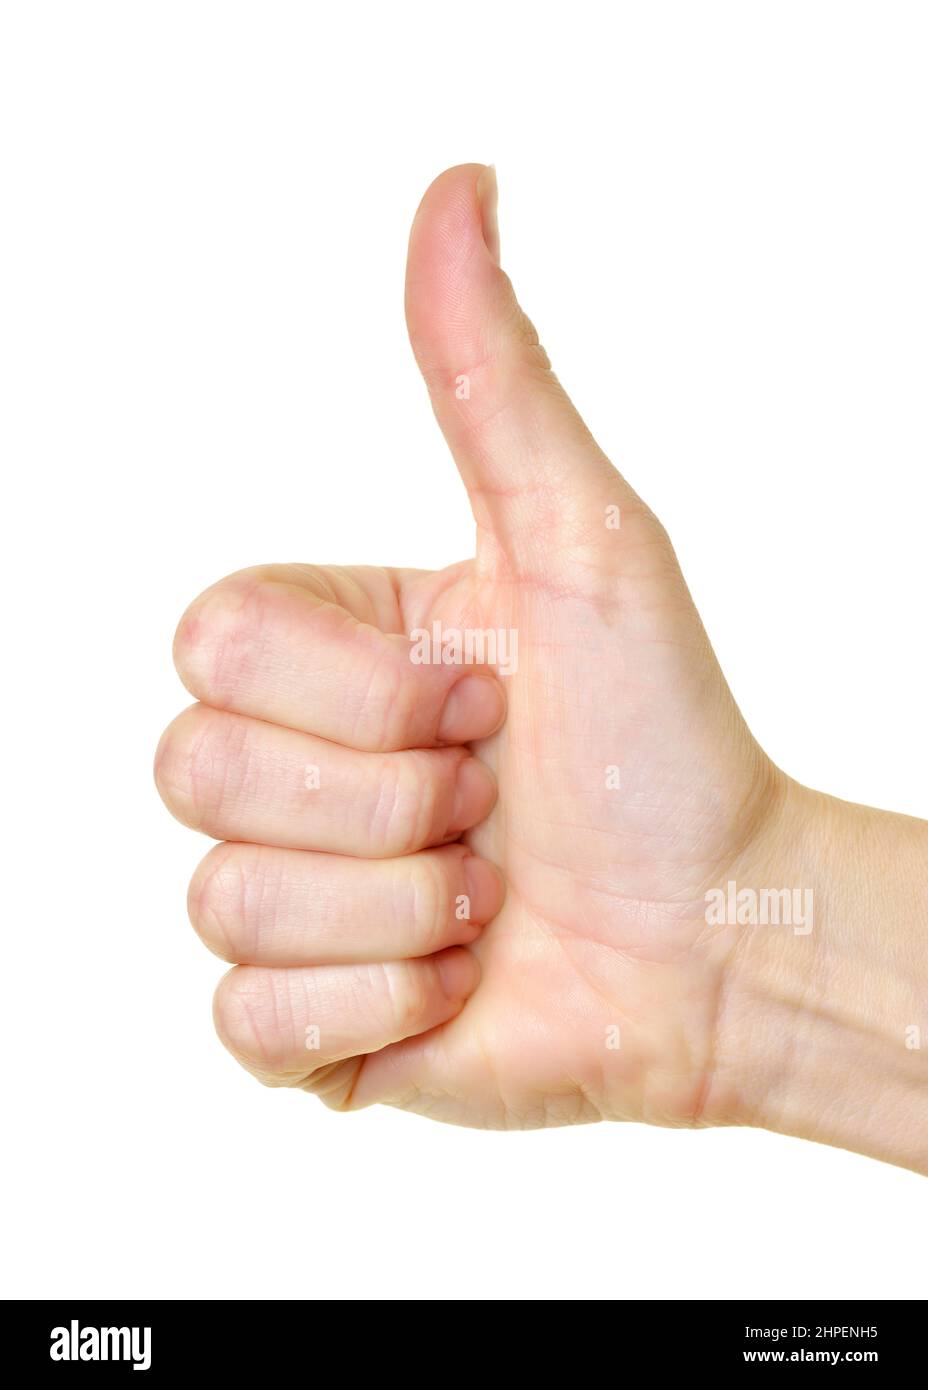 Thumbs Up Against a White Background Stock Photo